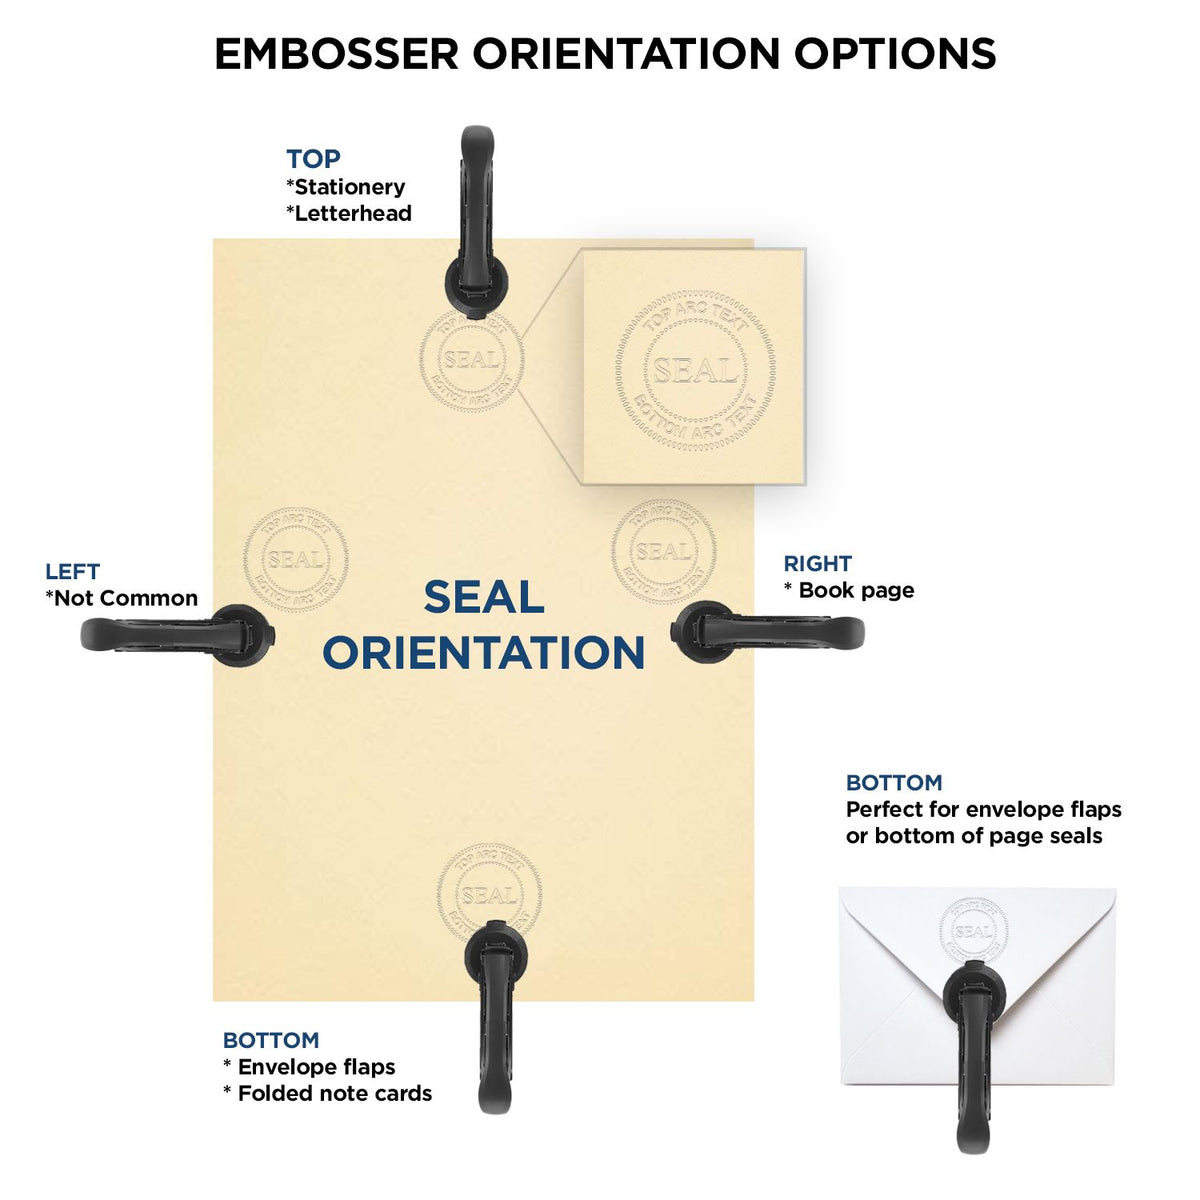 An infographic for the State of New Jersey Extended Long Reach Geologist Seal showing embosser orientation, this is showing examples of a top, bottom, right and left insert.